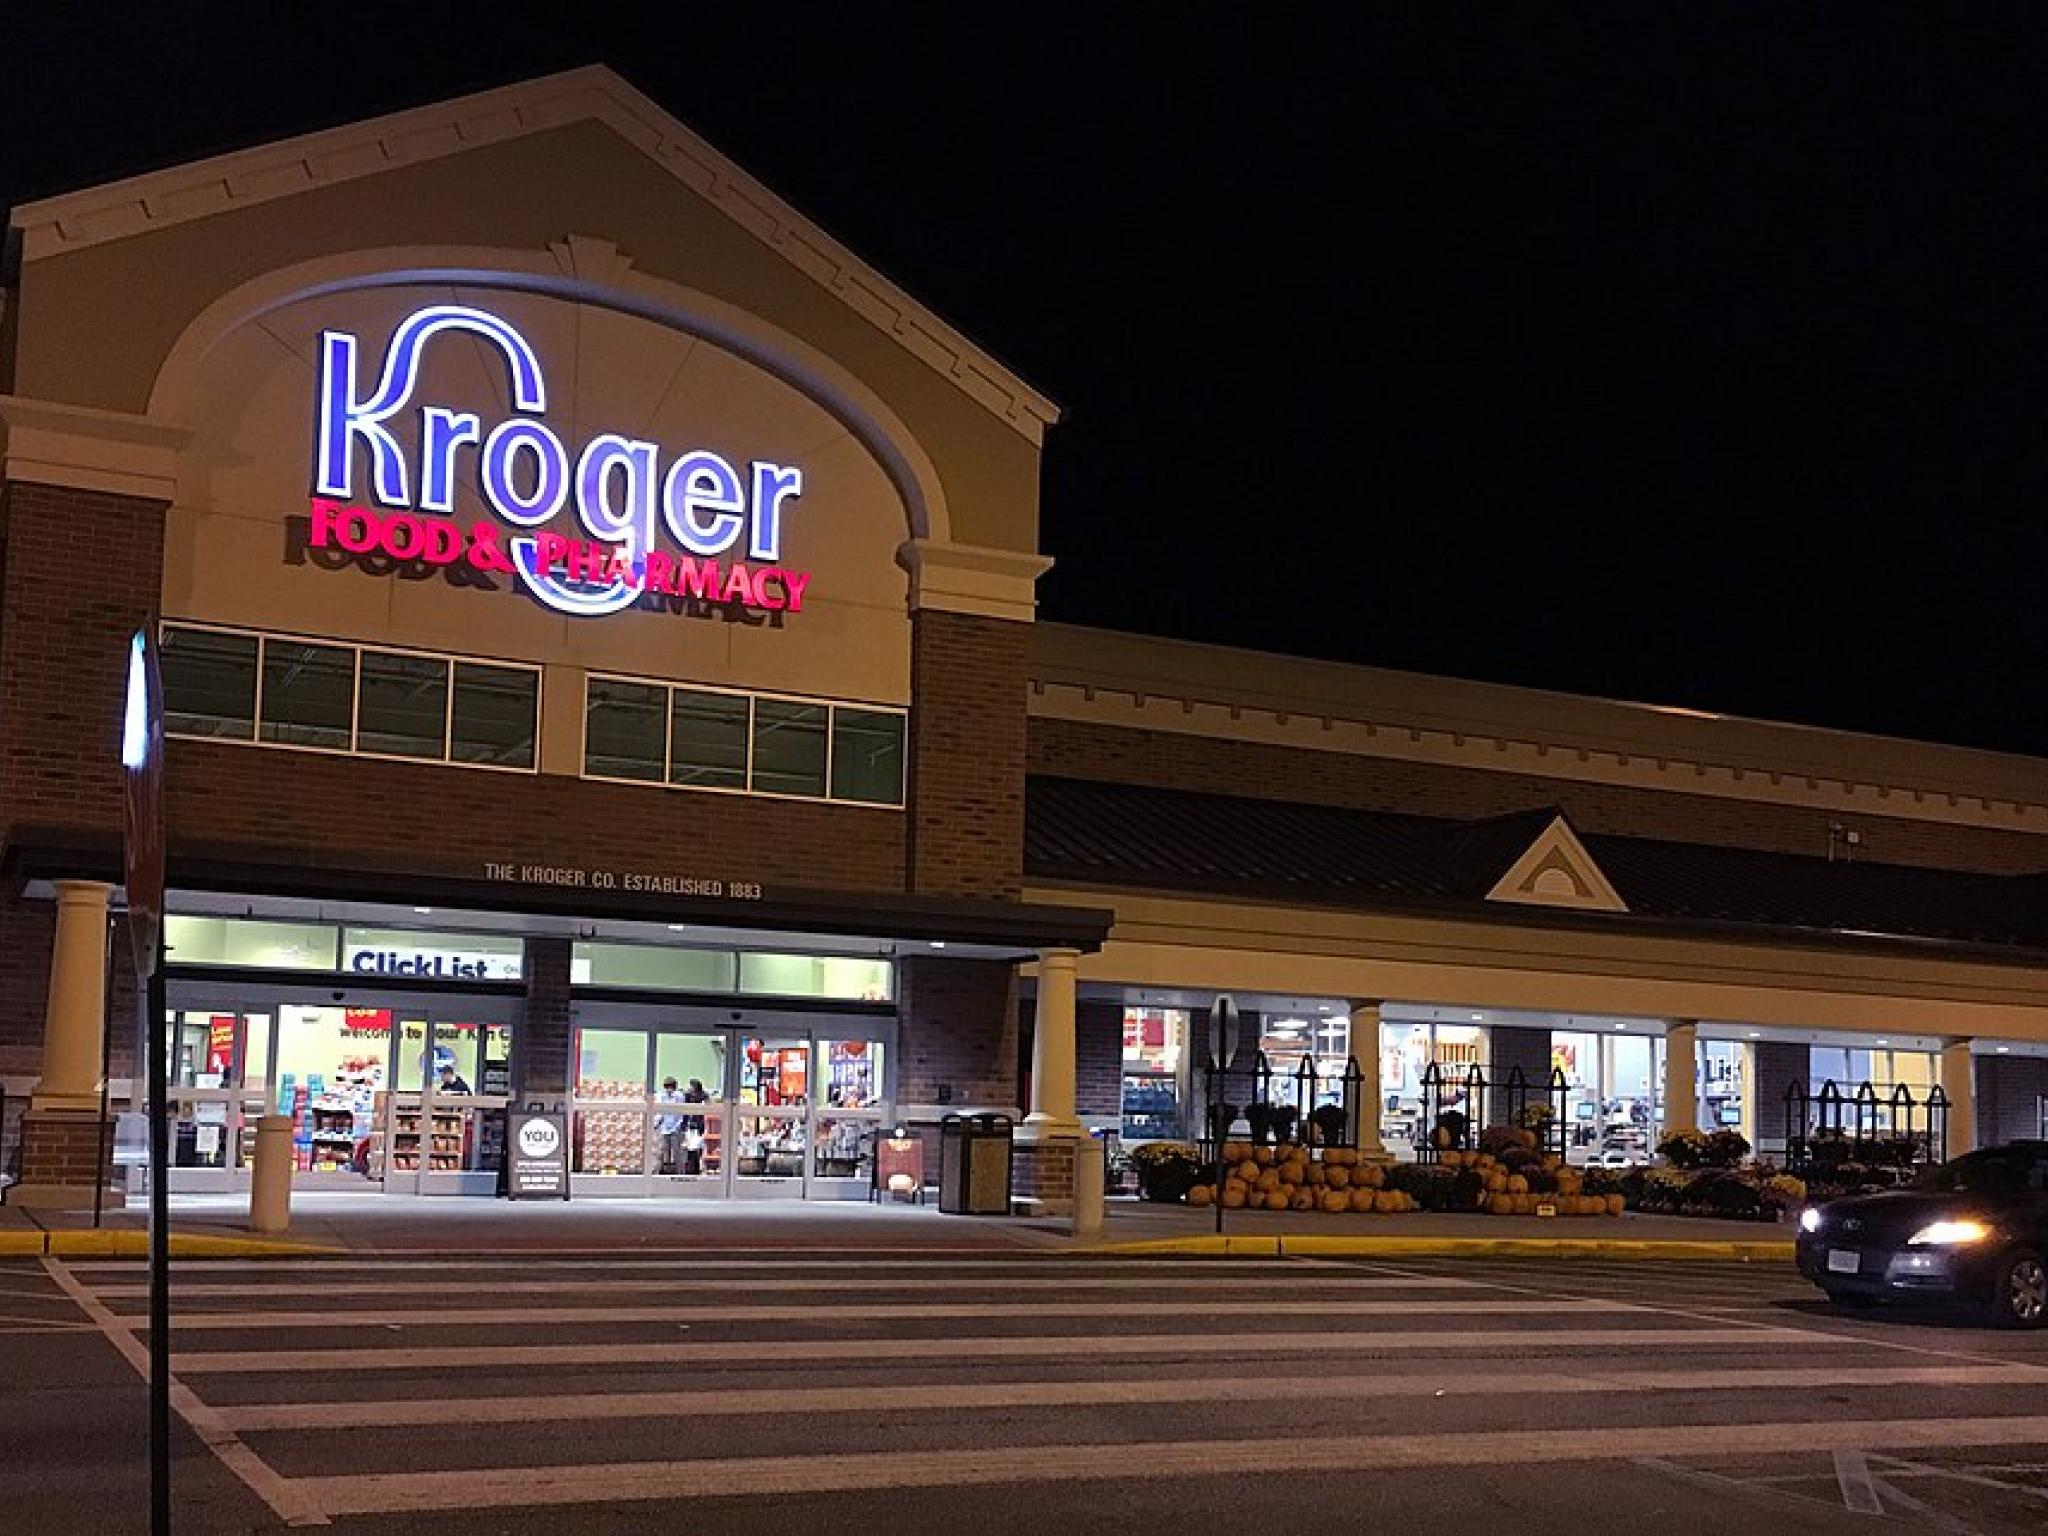  kroger-to-gain-from-long-term-margin-support-higher-customer-visits---analyst-sees-attractive-entry-point 